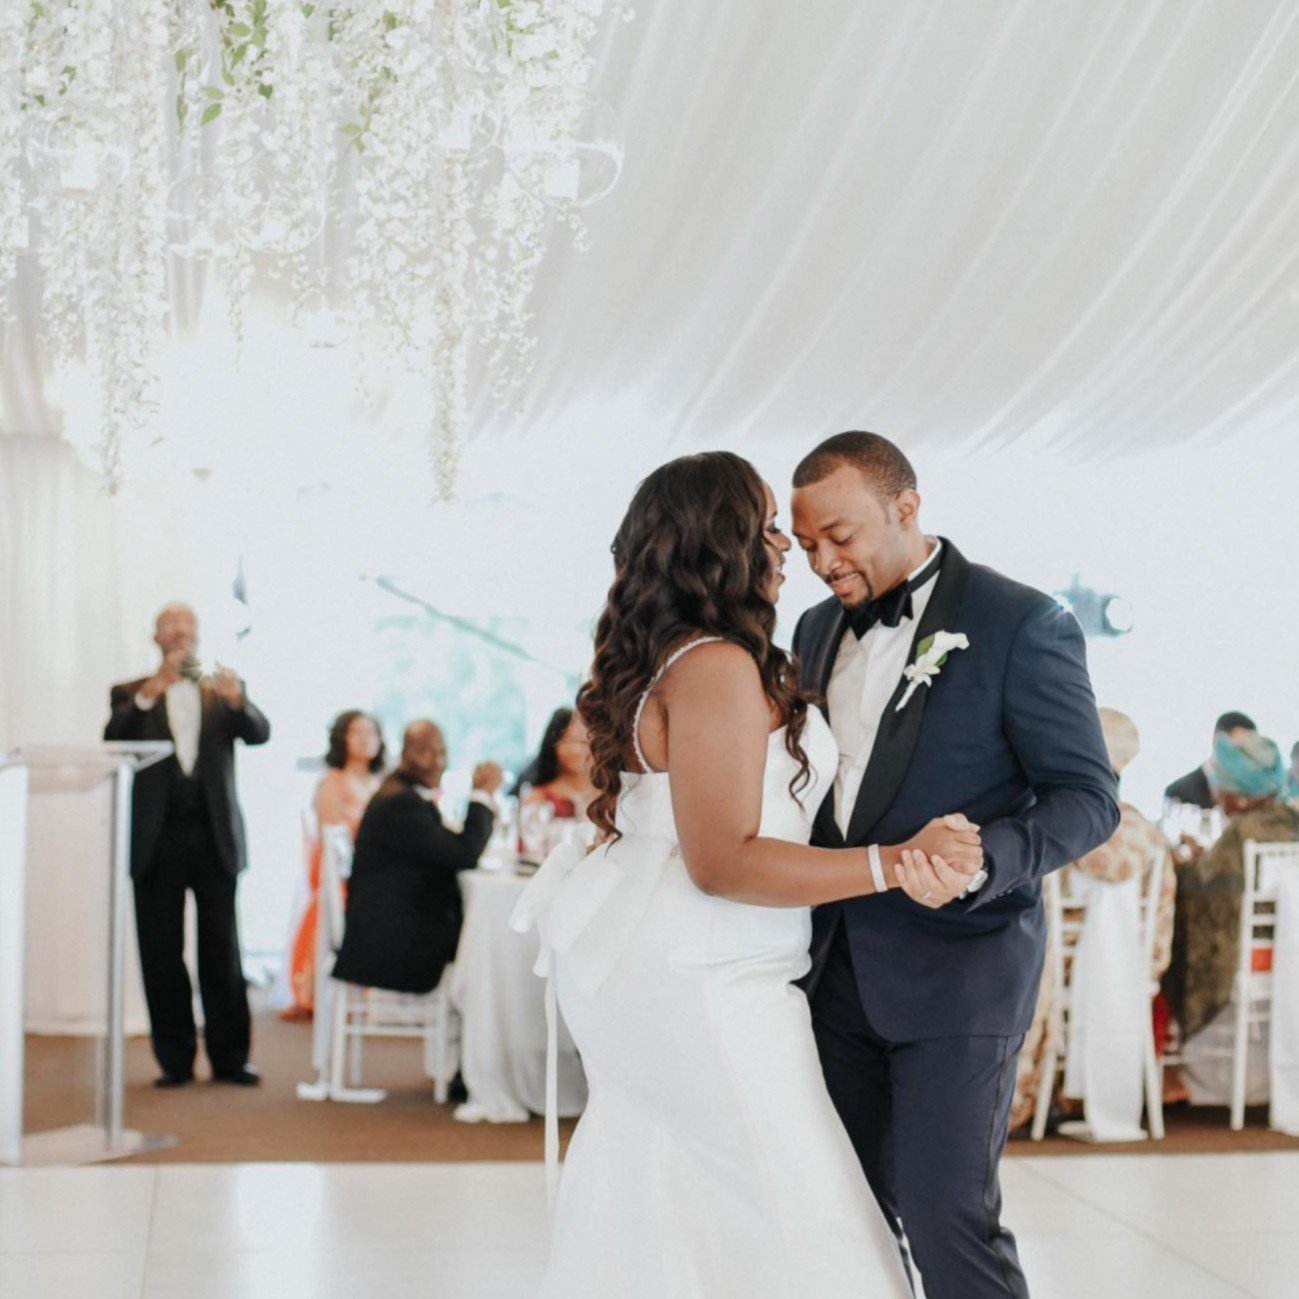 On Cloud Nine ⛅ 💫 Tell us this reception isn&rsquo;t what dreams are made of 🥰

From the custom dance floor to the all-white chair accents and floral chandelier, this dream team brought Jen &amp; Peter's Vision to life.

Florals: @surroundingsflora